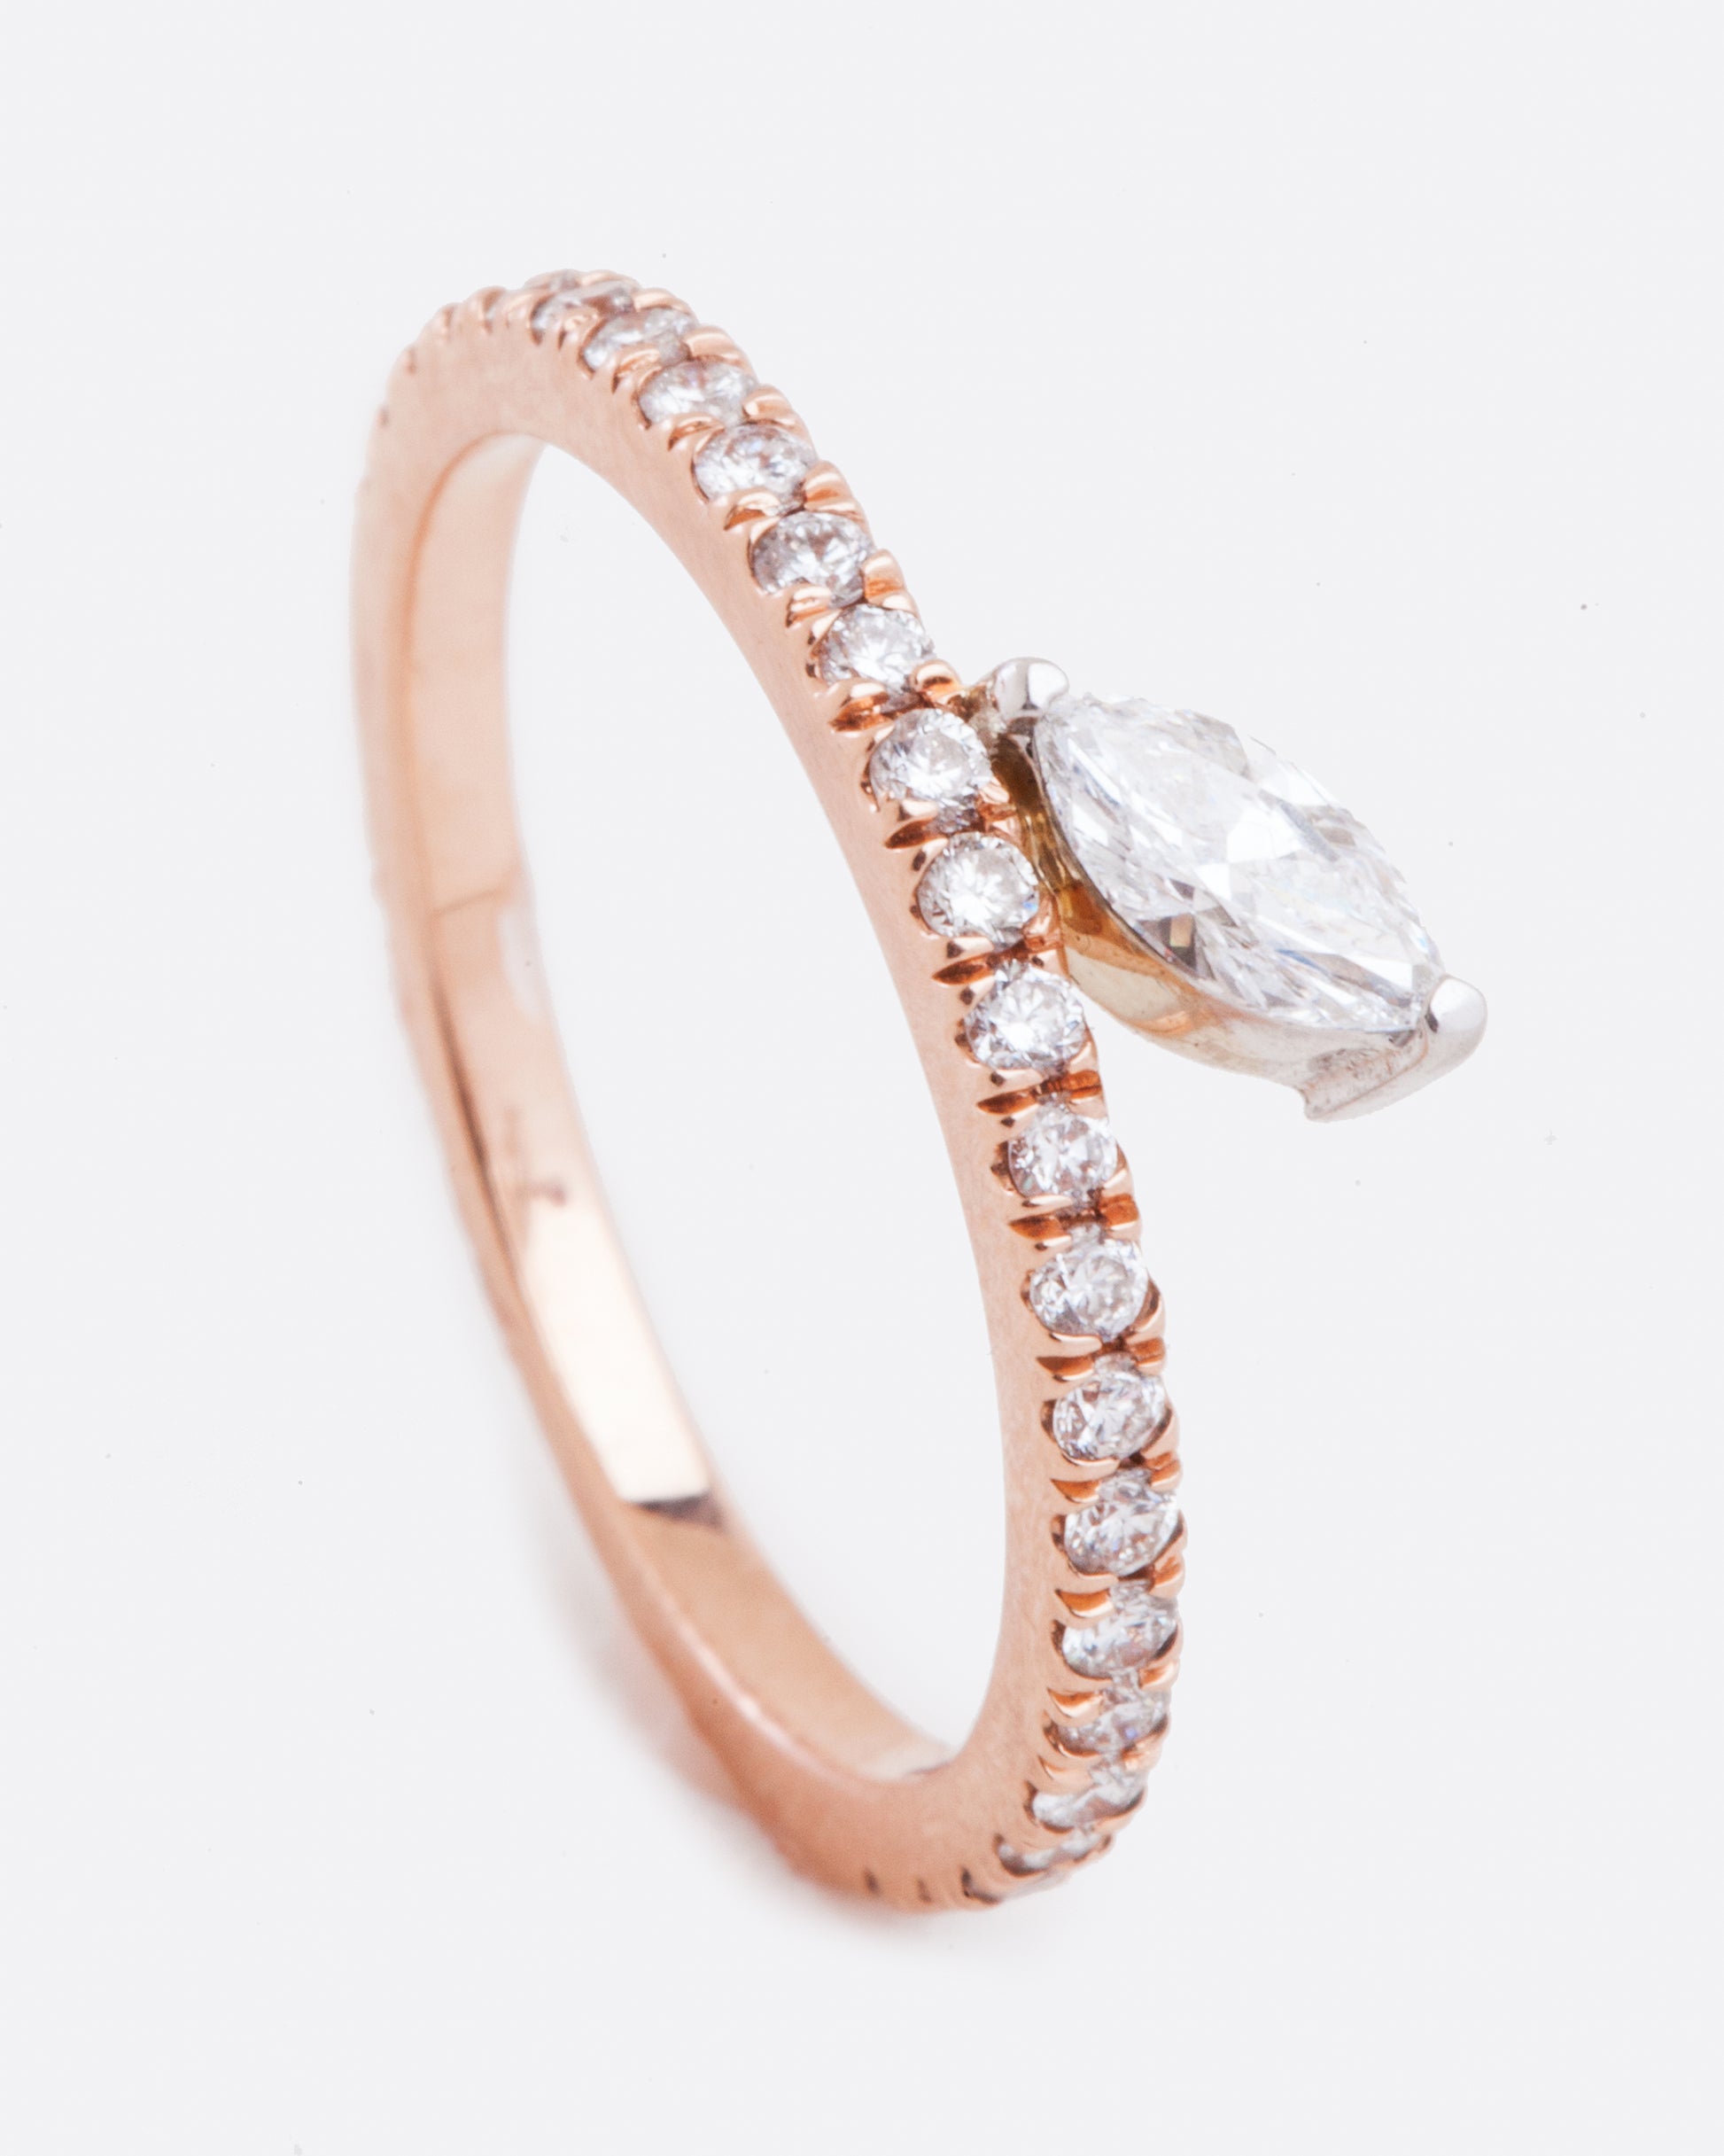 Standing view of a marquise diamond sitting on a pave diamond rose gold band. The diamonds wrap 3/4 way around the ring.